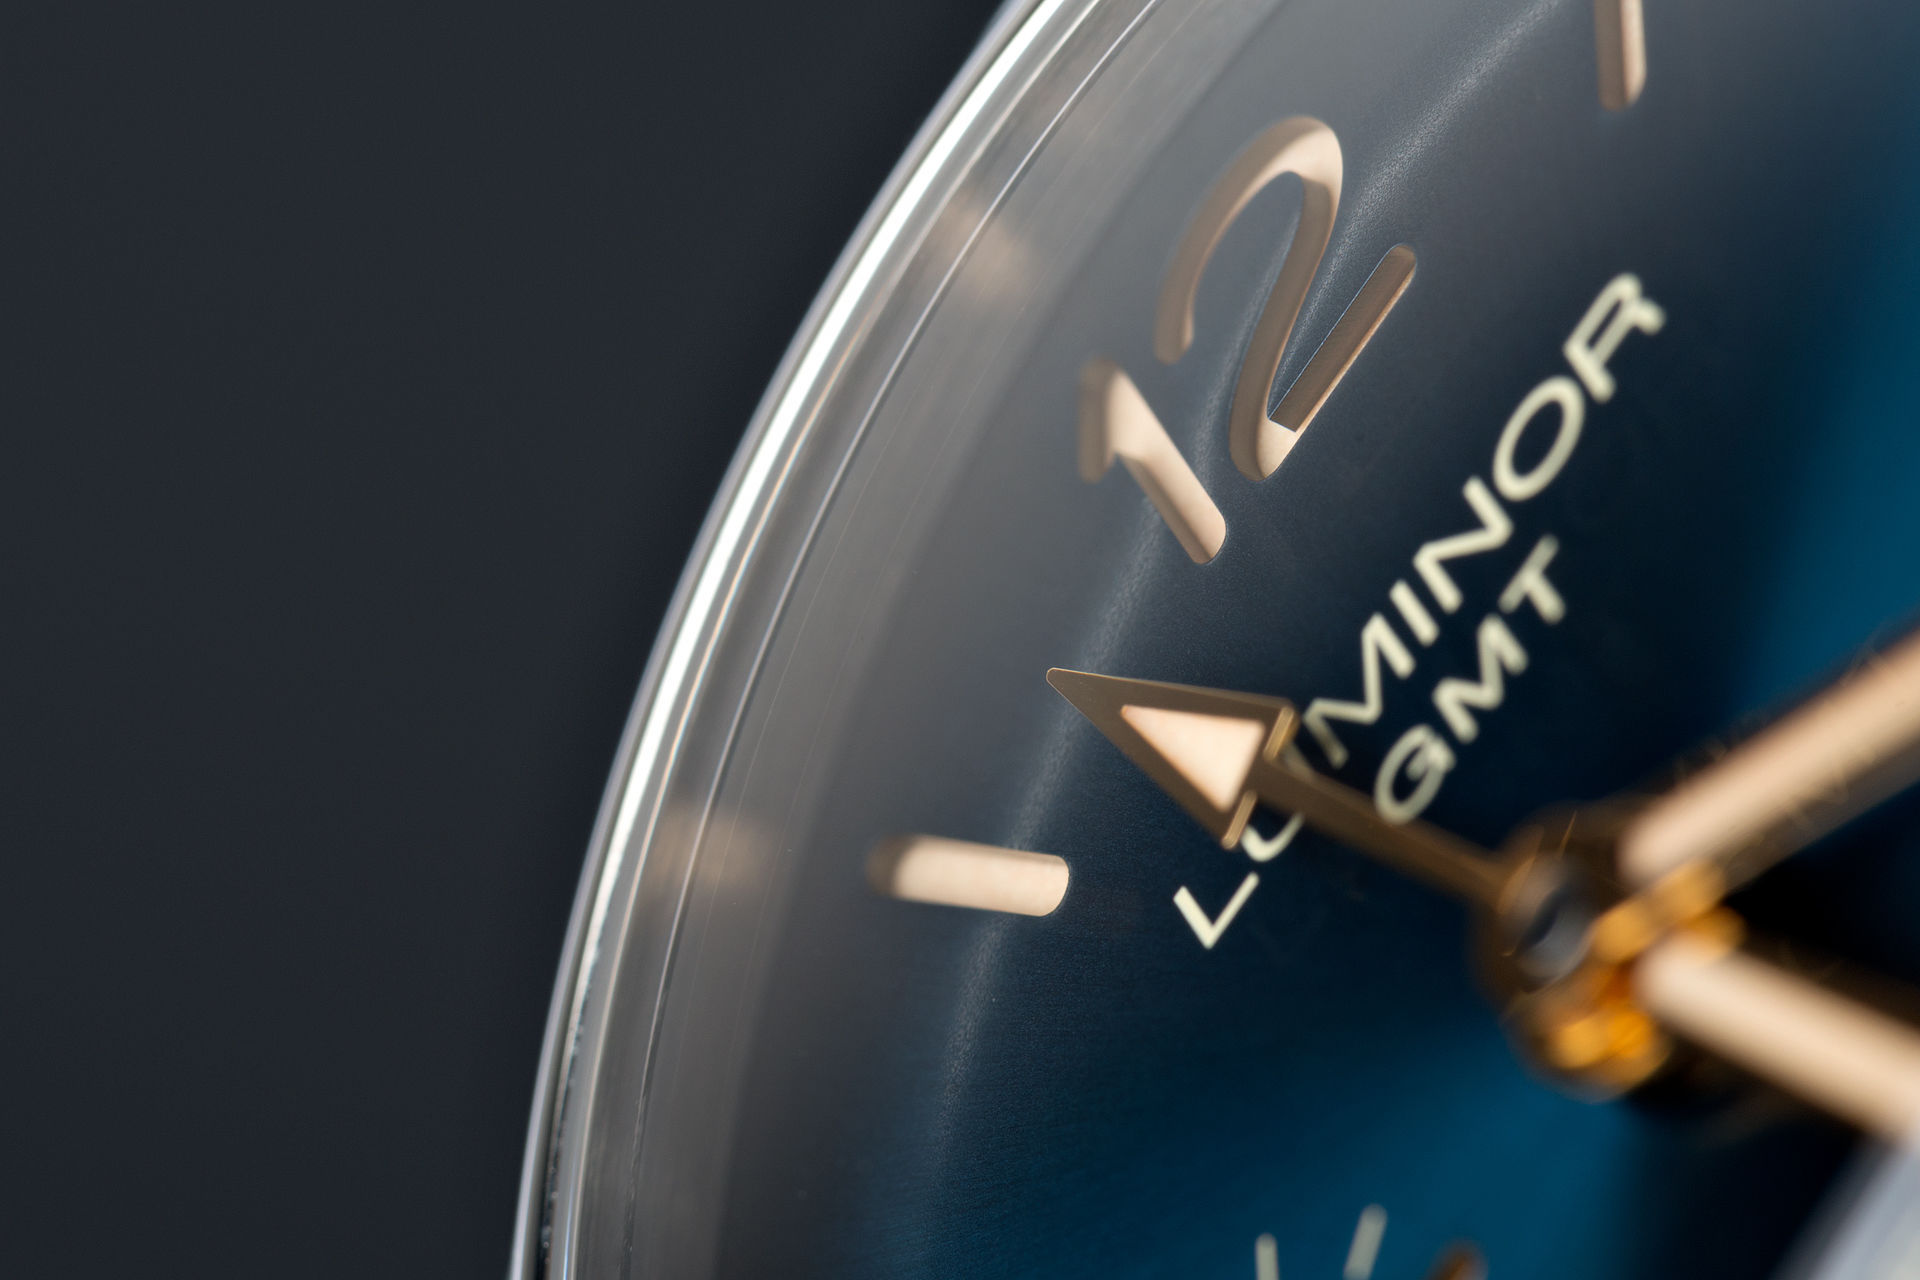 ref PAM00688 | 'Special Edition' Boutique Only | Panerai Luminor 1950 3-Day GMT